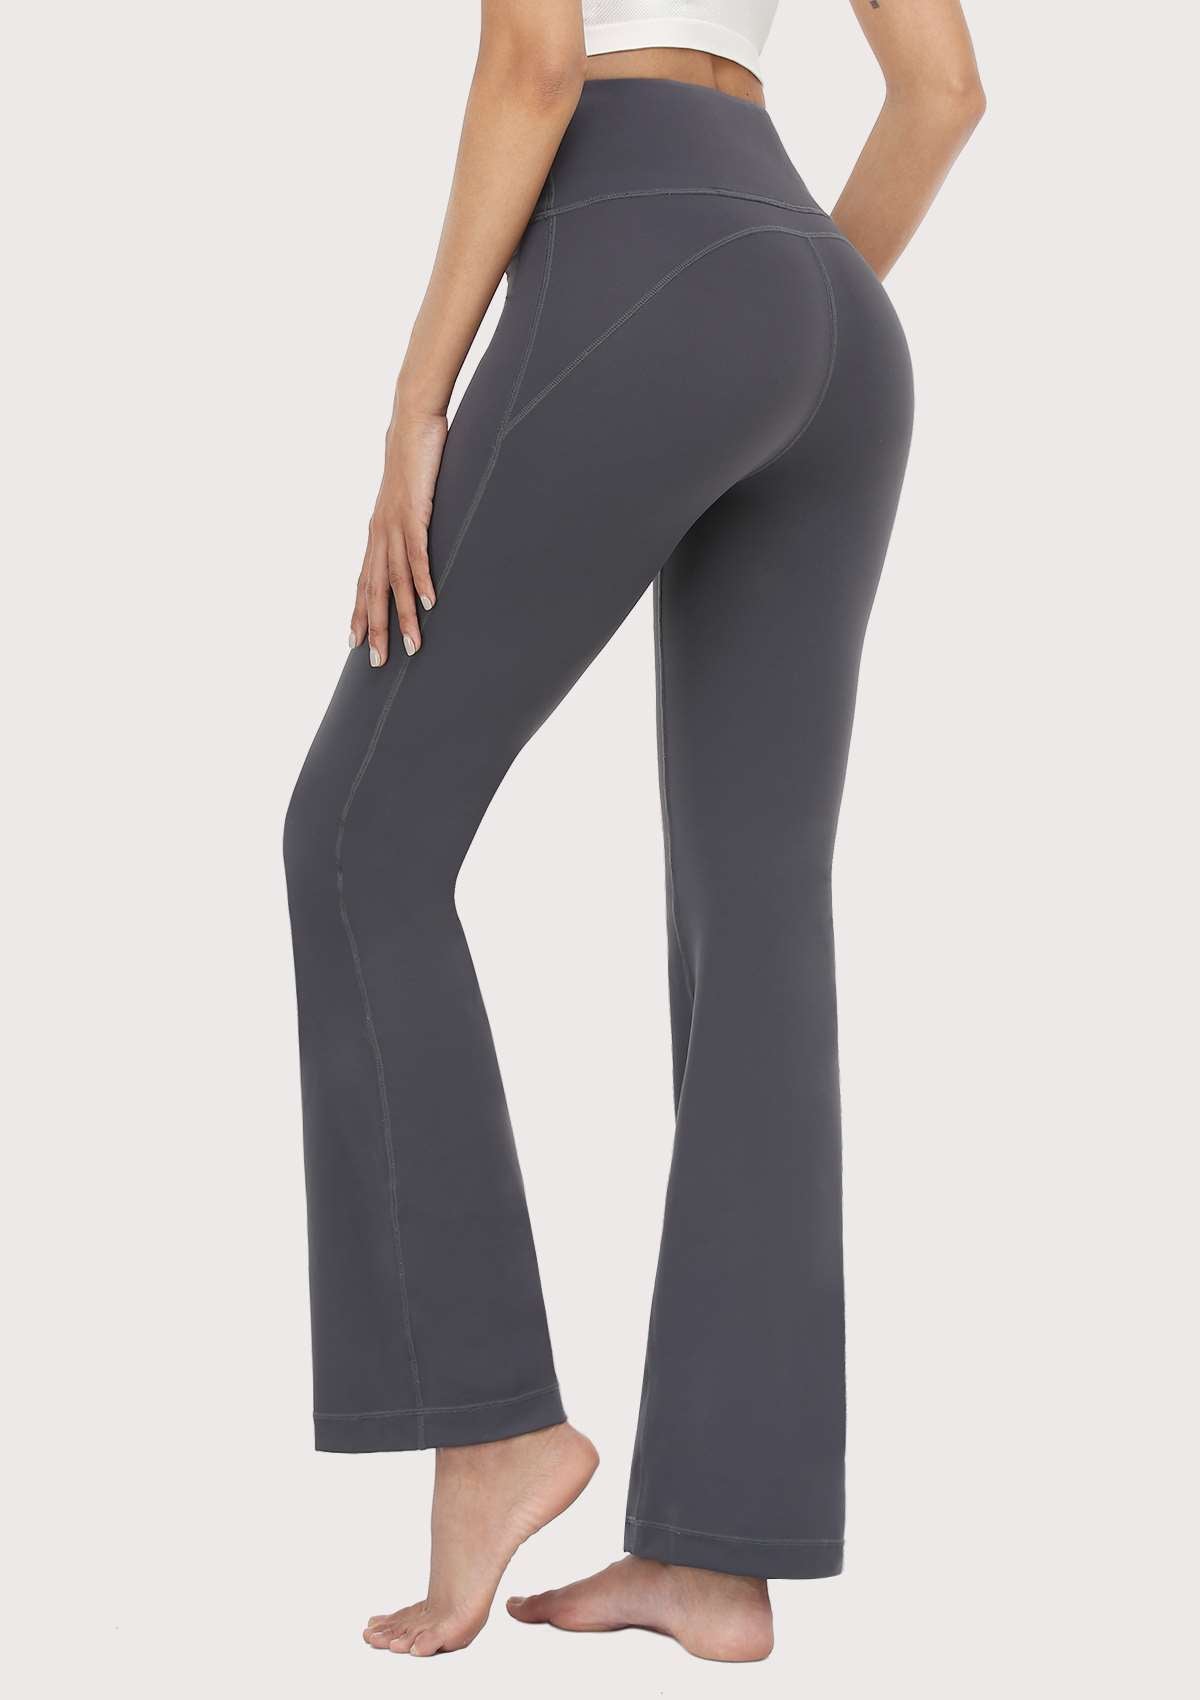 SONGFUL Smooth High Waisted Bootcut Yoga Sports Pants - L / Dark Blue